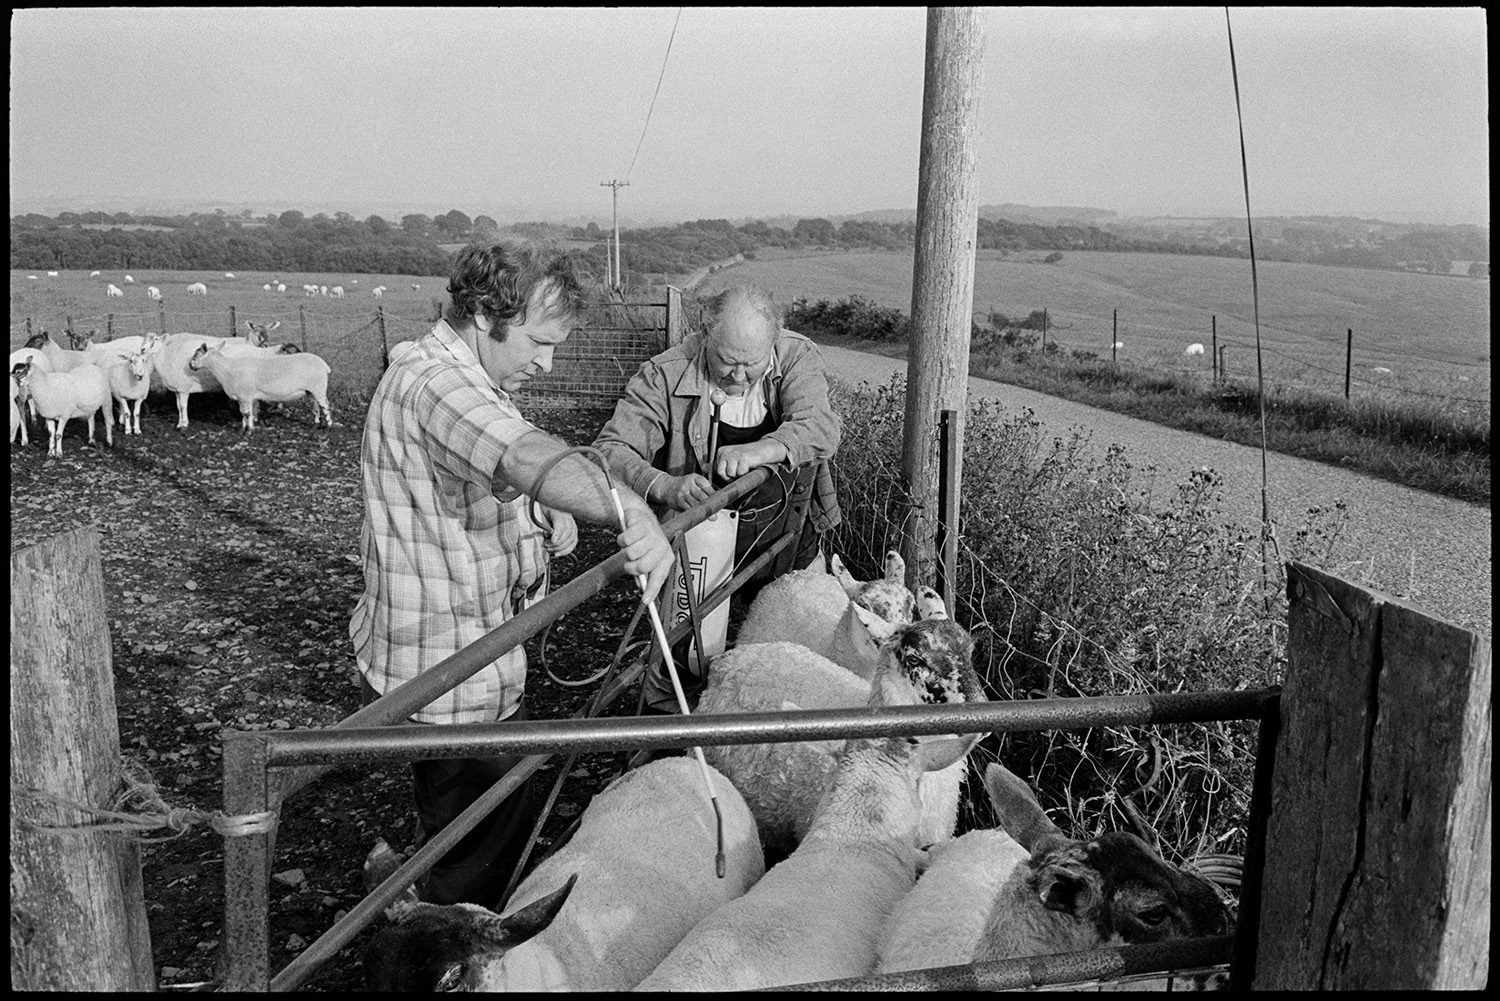 Farmers checking sheep on moor held in pen.
[Two men checking and spraying sheep, in a metal pen on Hatherleigh Moor. Sheep can be seen in a field in the background, next to a road and telegraph poles.]